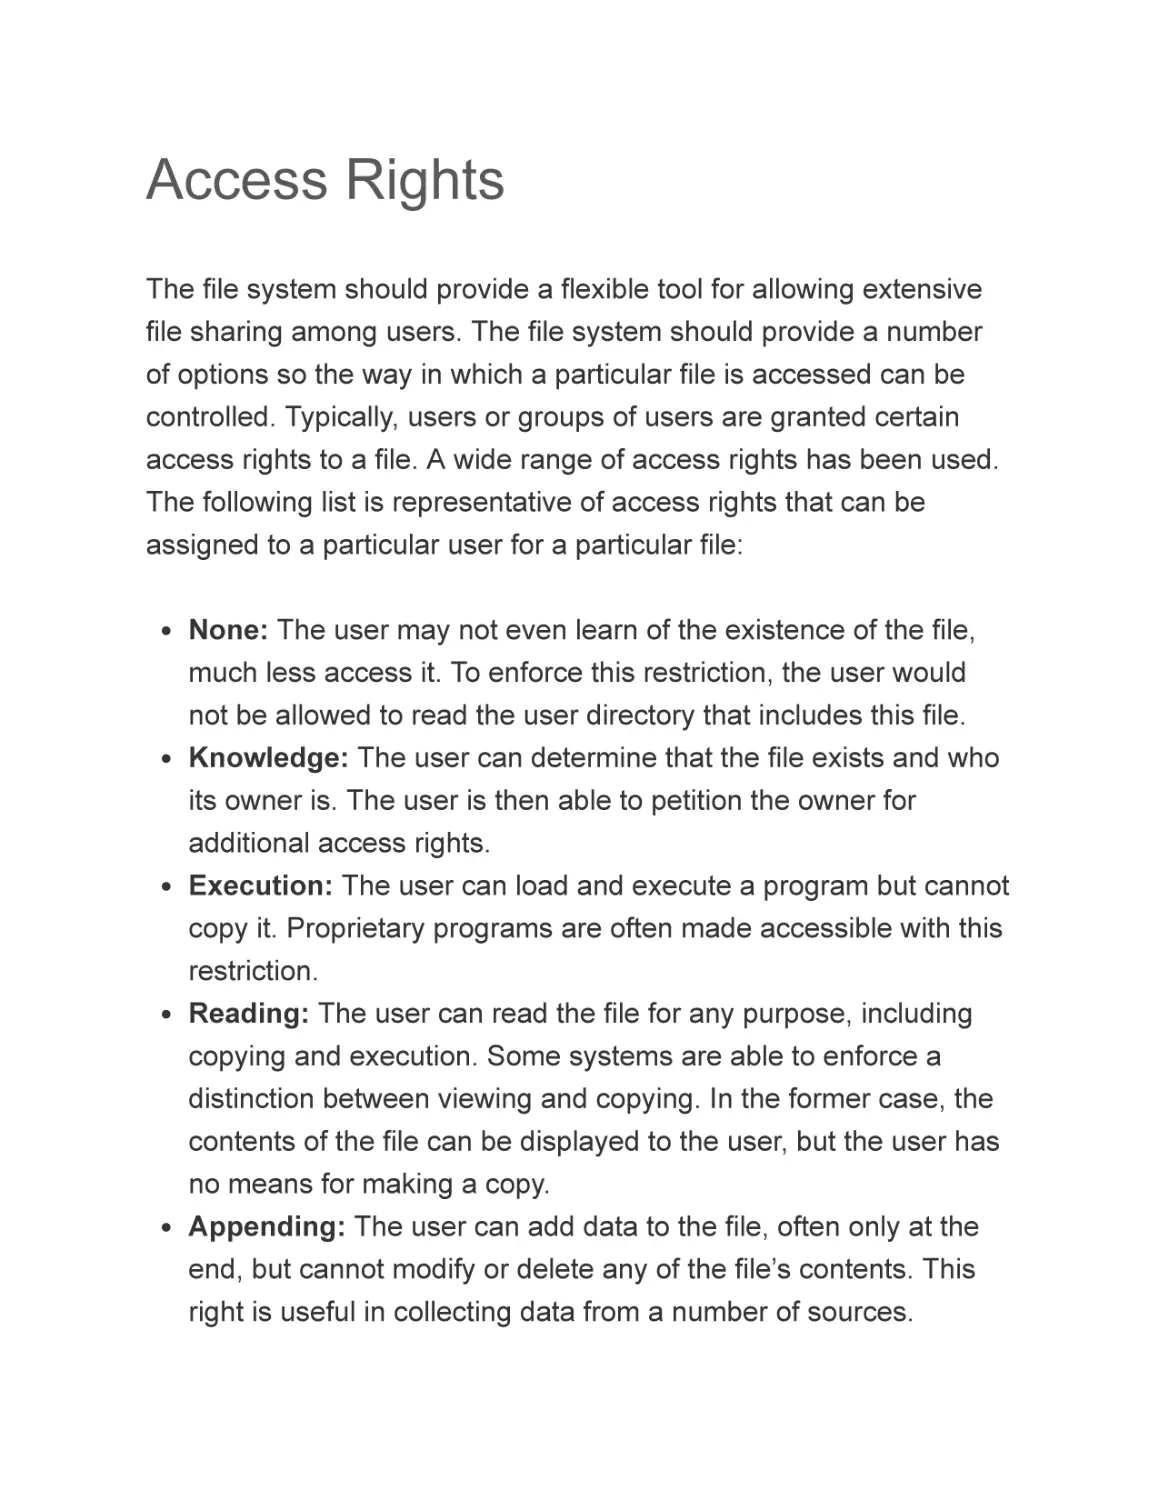 Access Rights